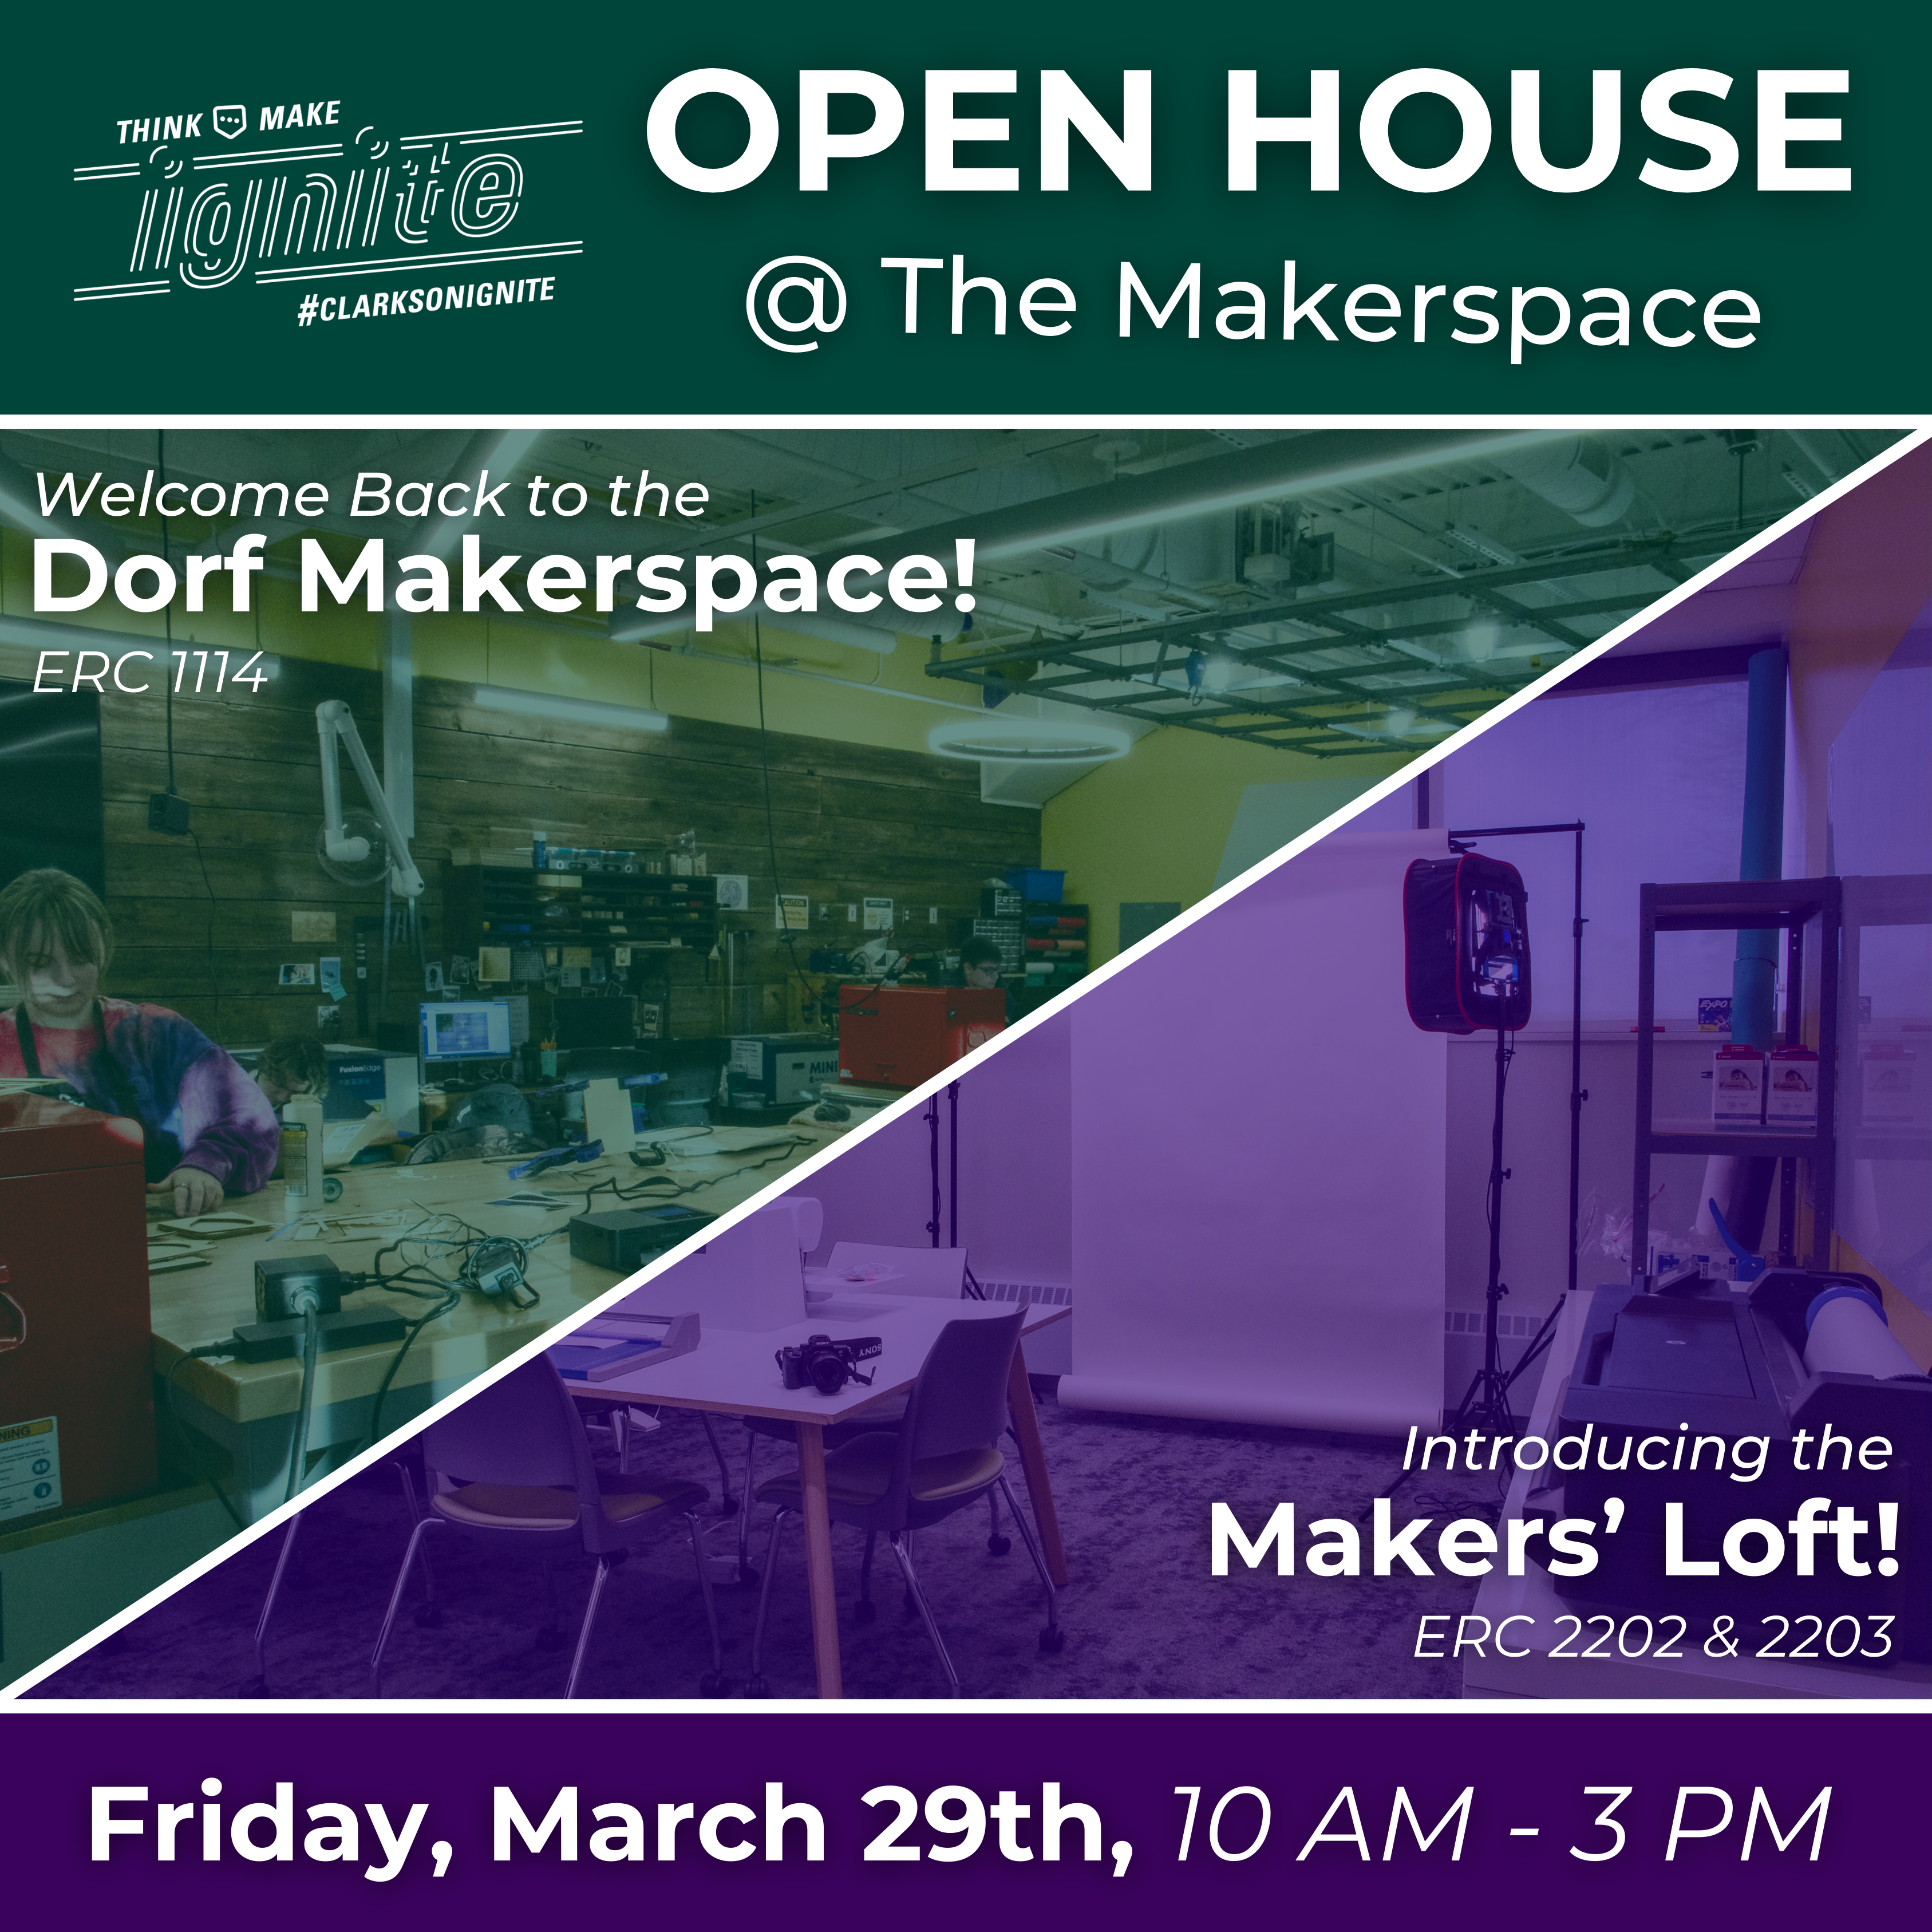 An advertisement for the Open House @ The Makerspace event, featuring the date and time (Friday, March 29th, 10 AM - 3 PM), as well as images of the Dorf Makerspace and Makers’ Loft spaces.